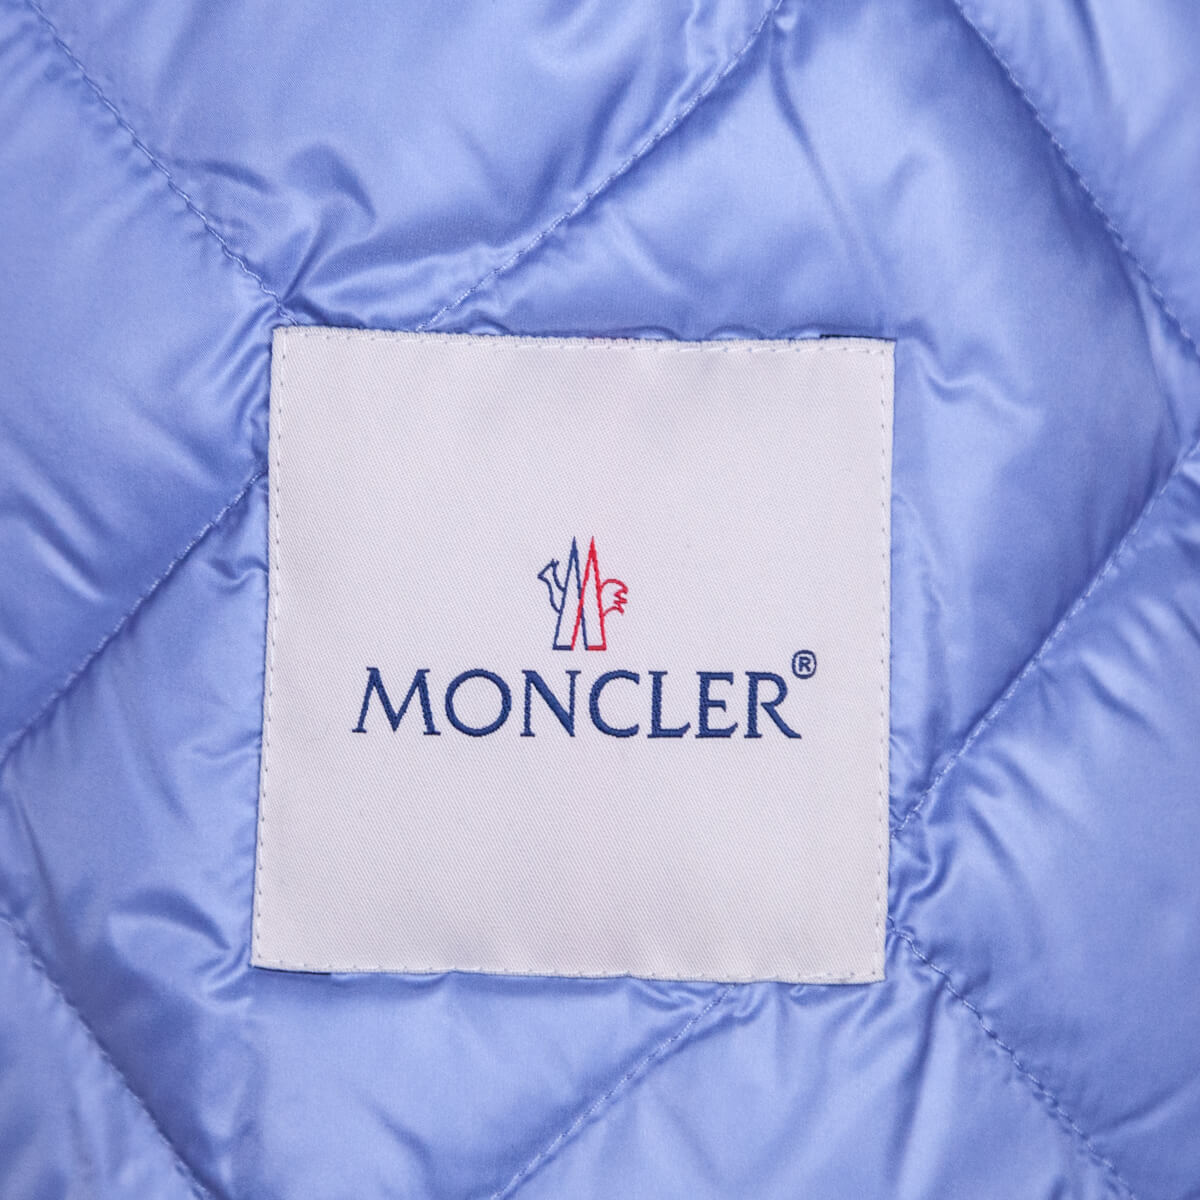 Moncler Blue Diamond Quilted Binic Giubbottto Down Jacket Size M | 2 - Love that Bag etc - Preowned Authentic Designer Handbags & Preloved Fashions